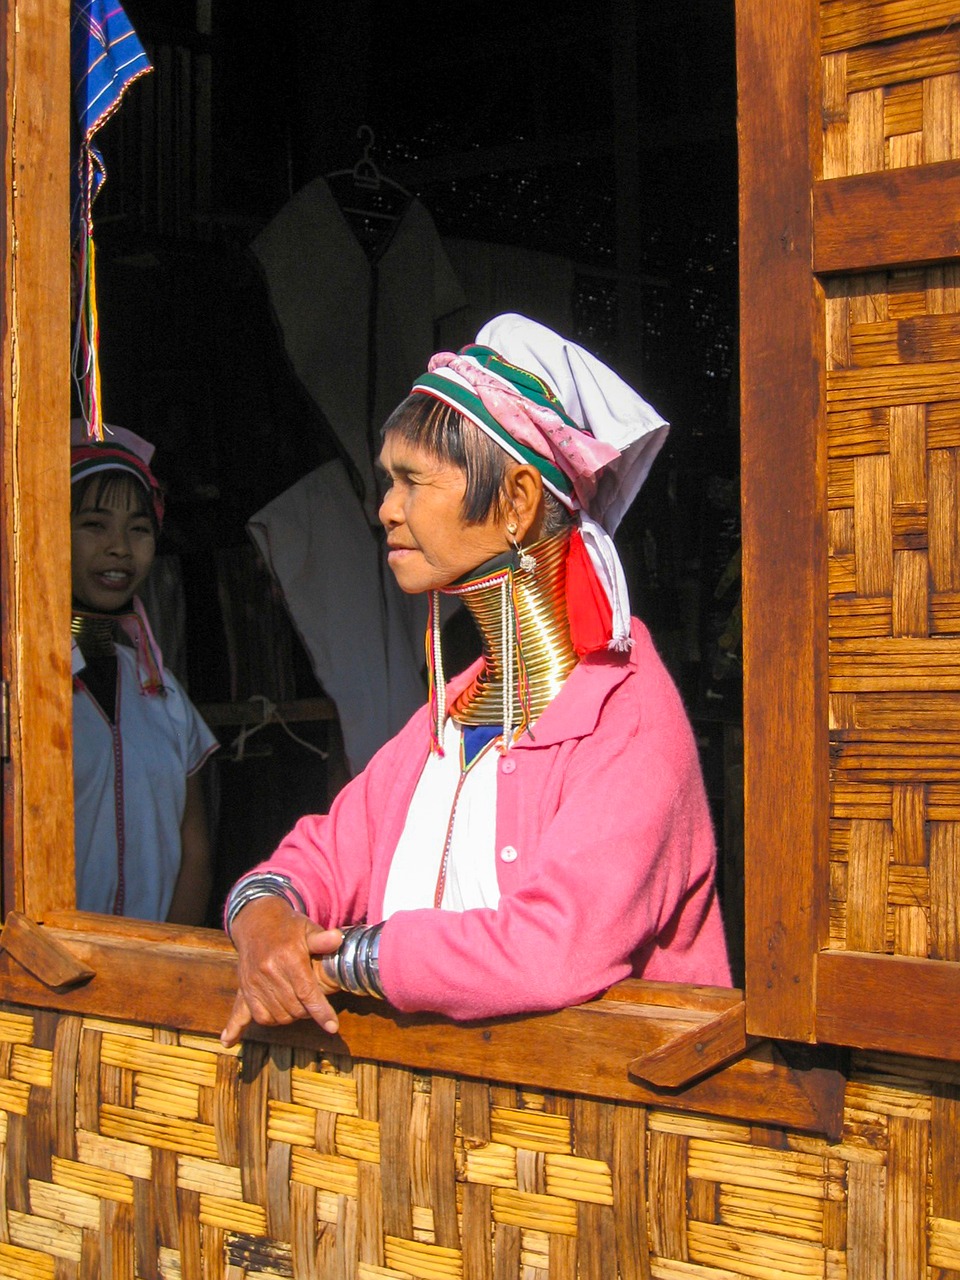 burma woman extended neck free photo